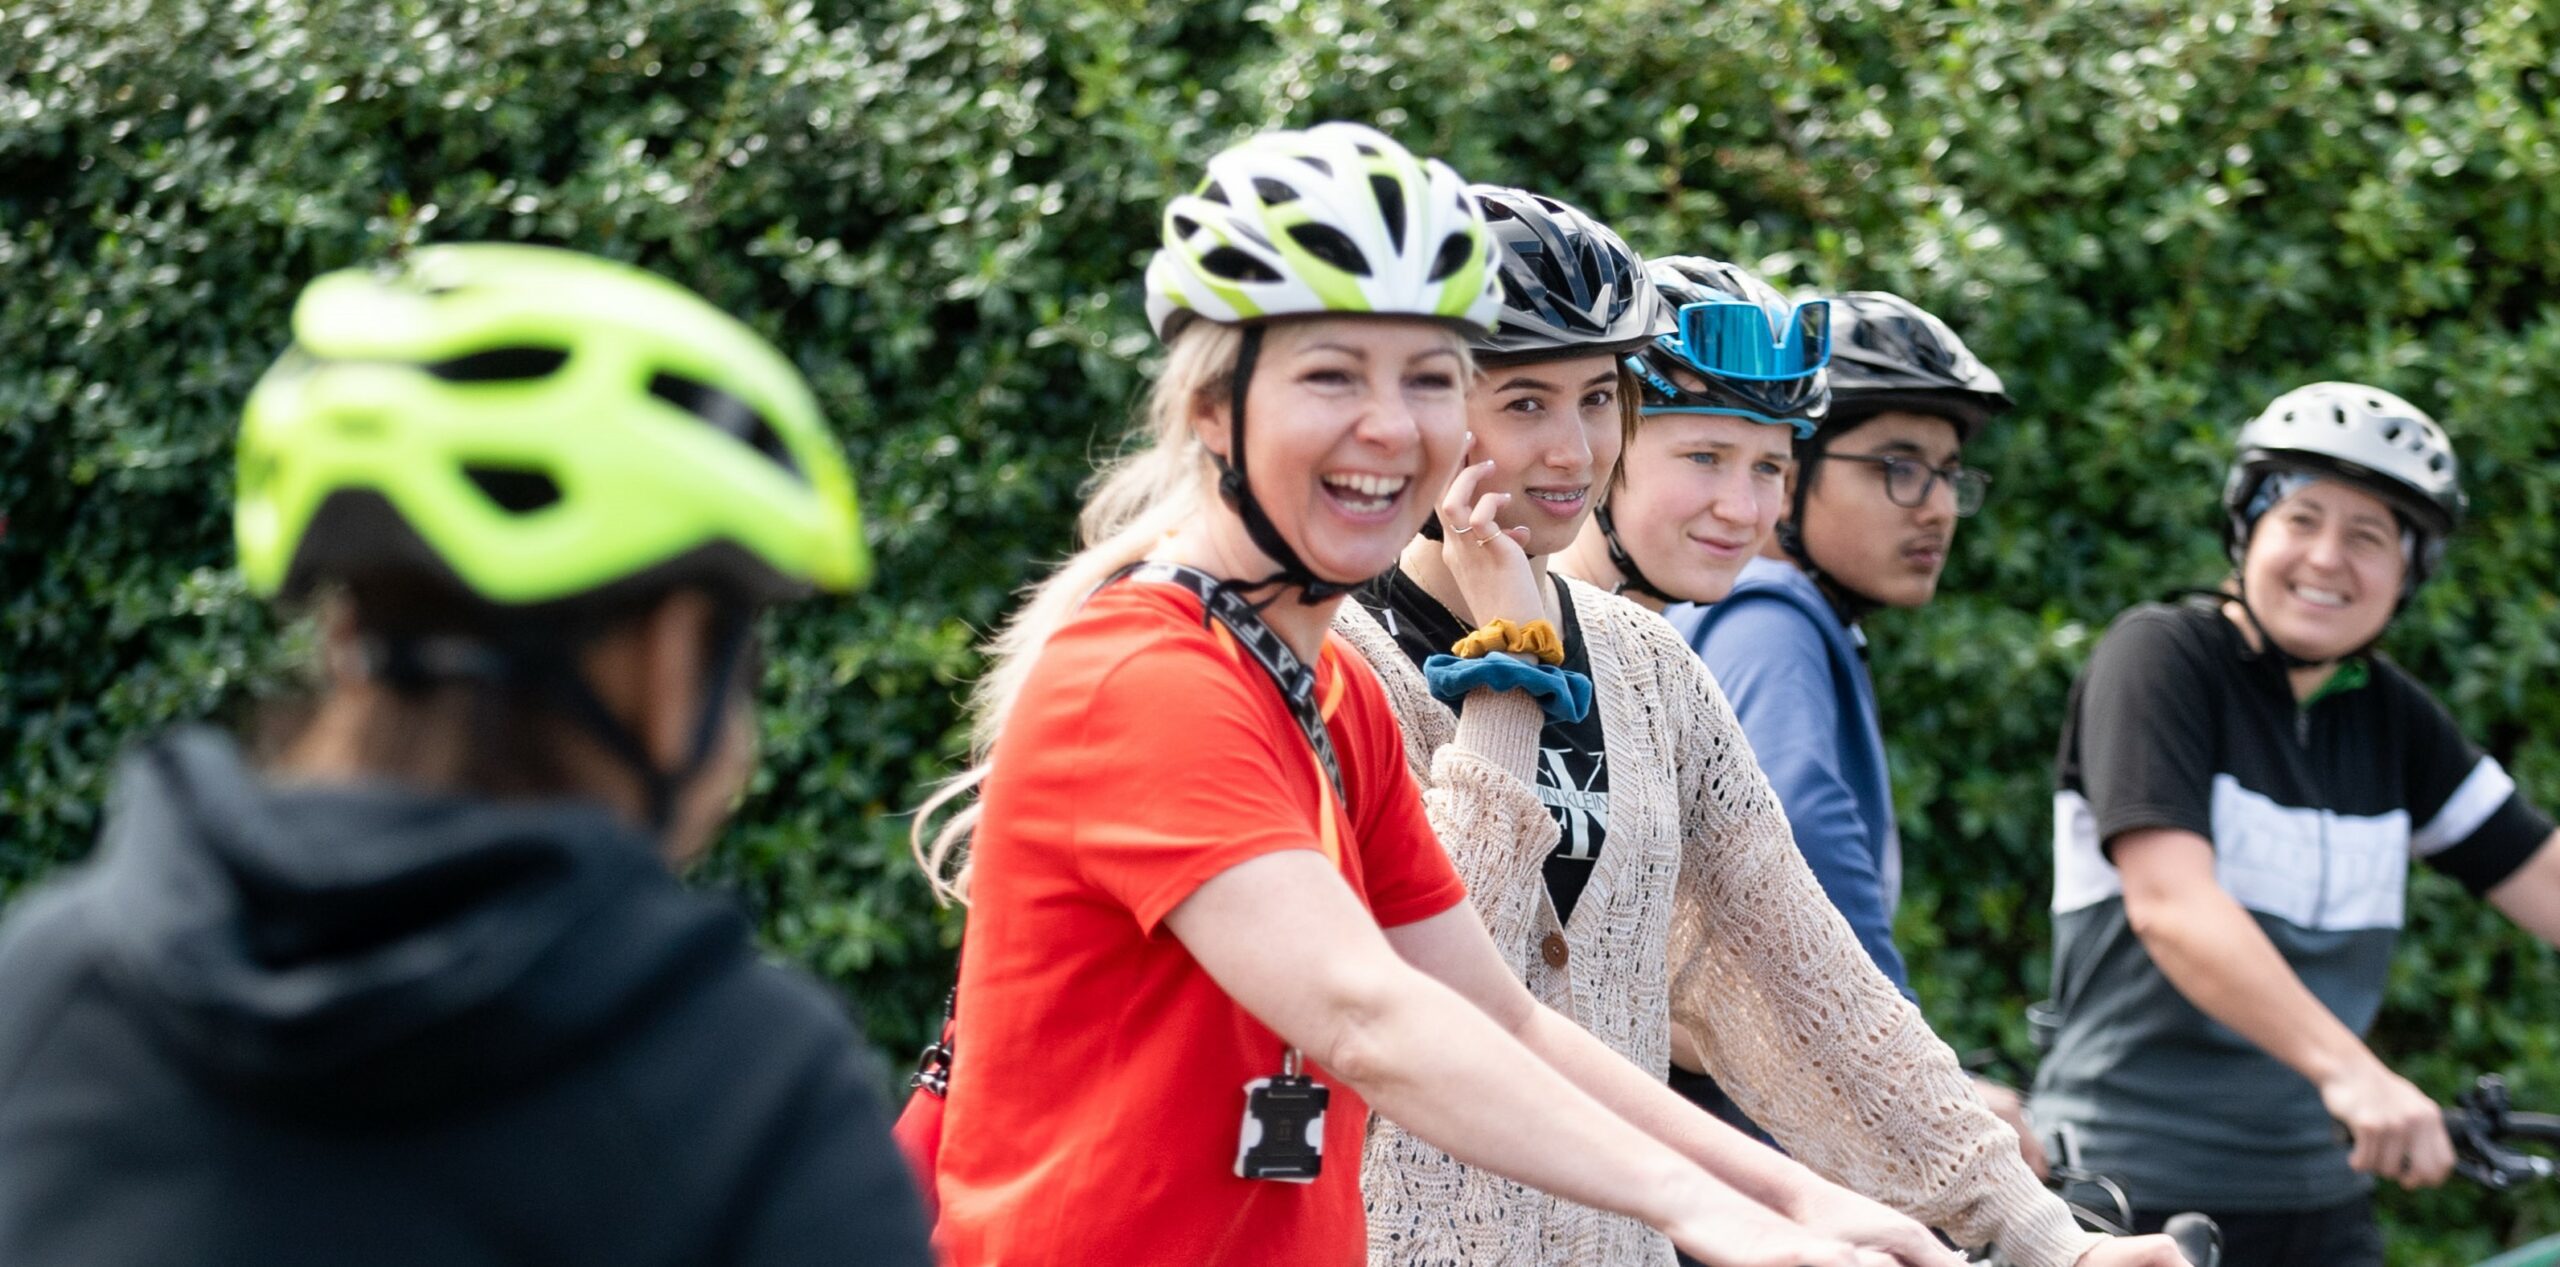 A group of people in helmets are smiling as they prepare to go on a cycle ride